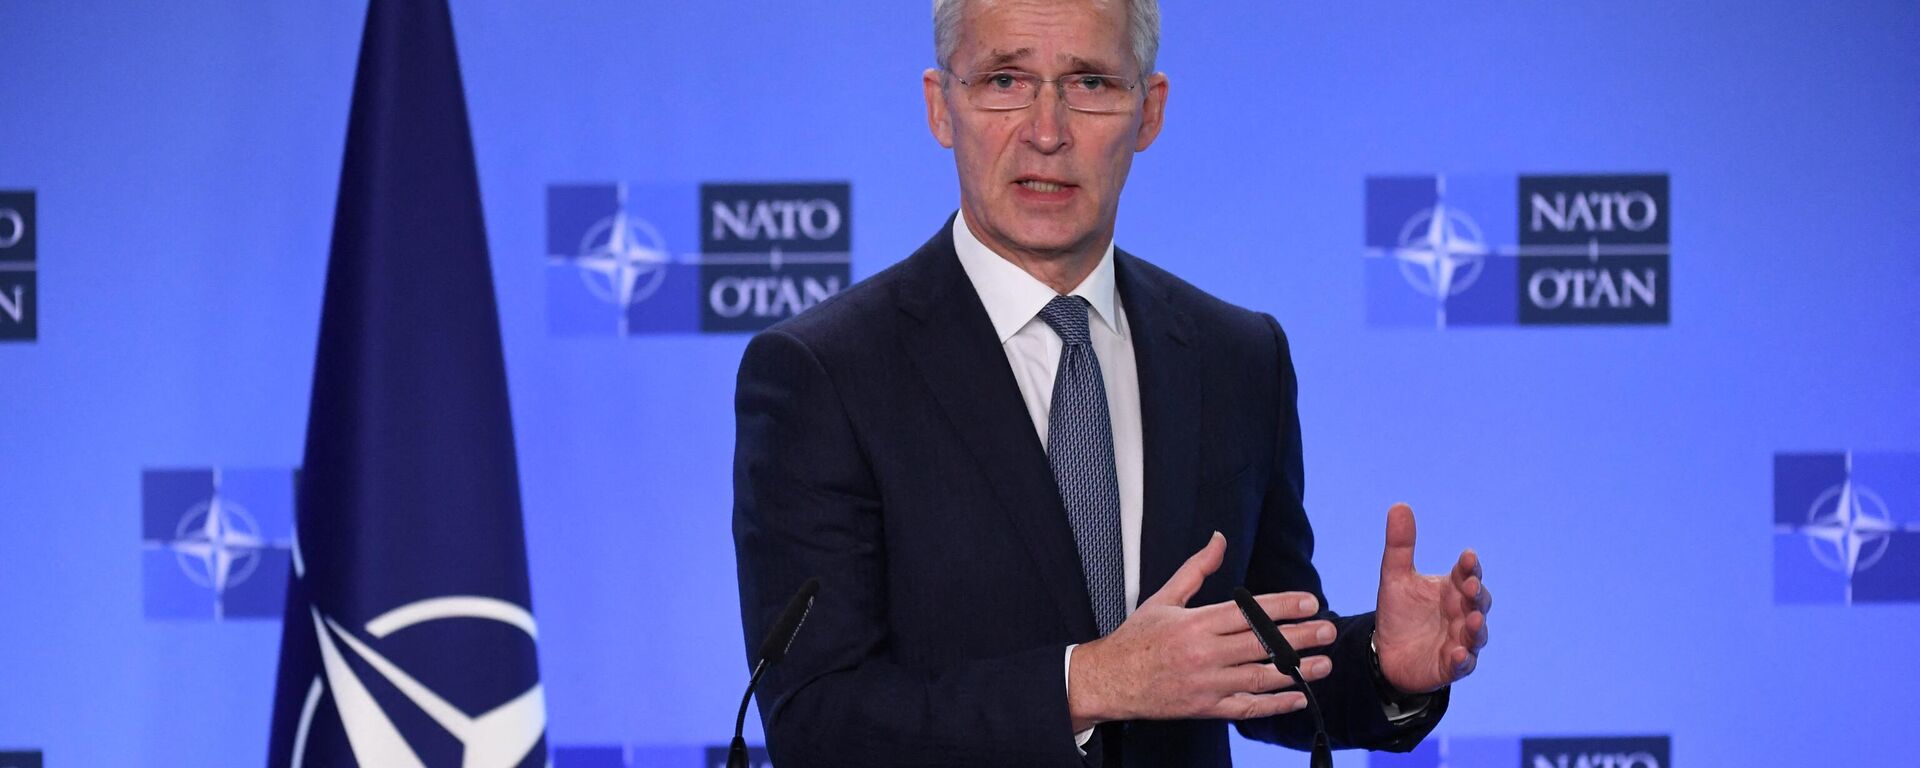 NATO Secretary General Jens Stoltenberg gestures as he speaks during a joint press conference with Ukraine's Deputy Prime Minister for European and Euro-Atlantic Integration after their bilateral meeting at the NATO headquarters in Brussels on January 10, 2022.  - Sputnik International, 1920, 10.01.2022